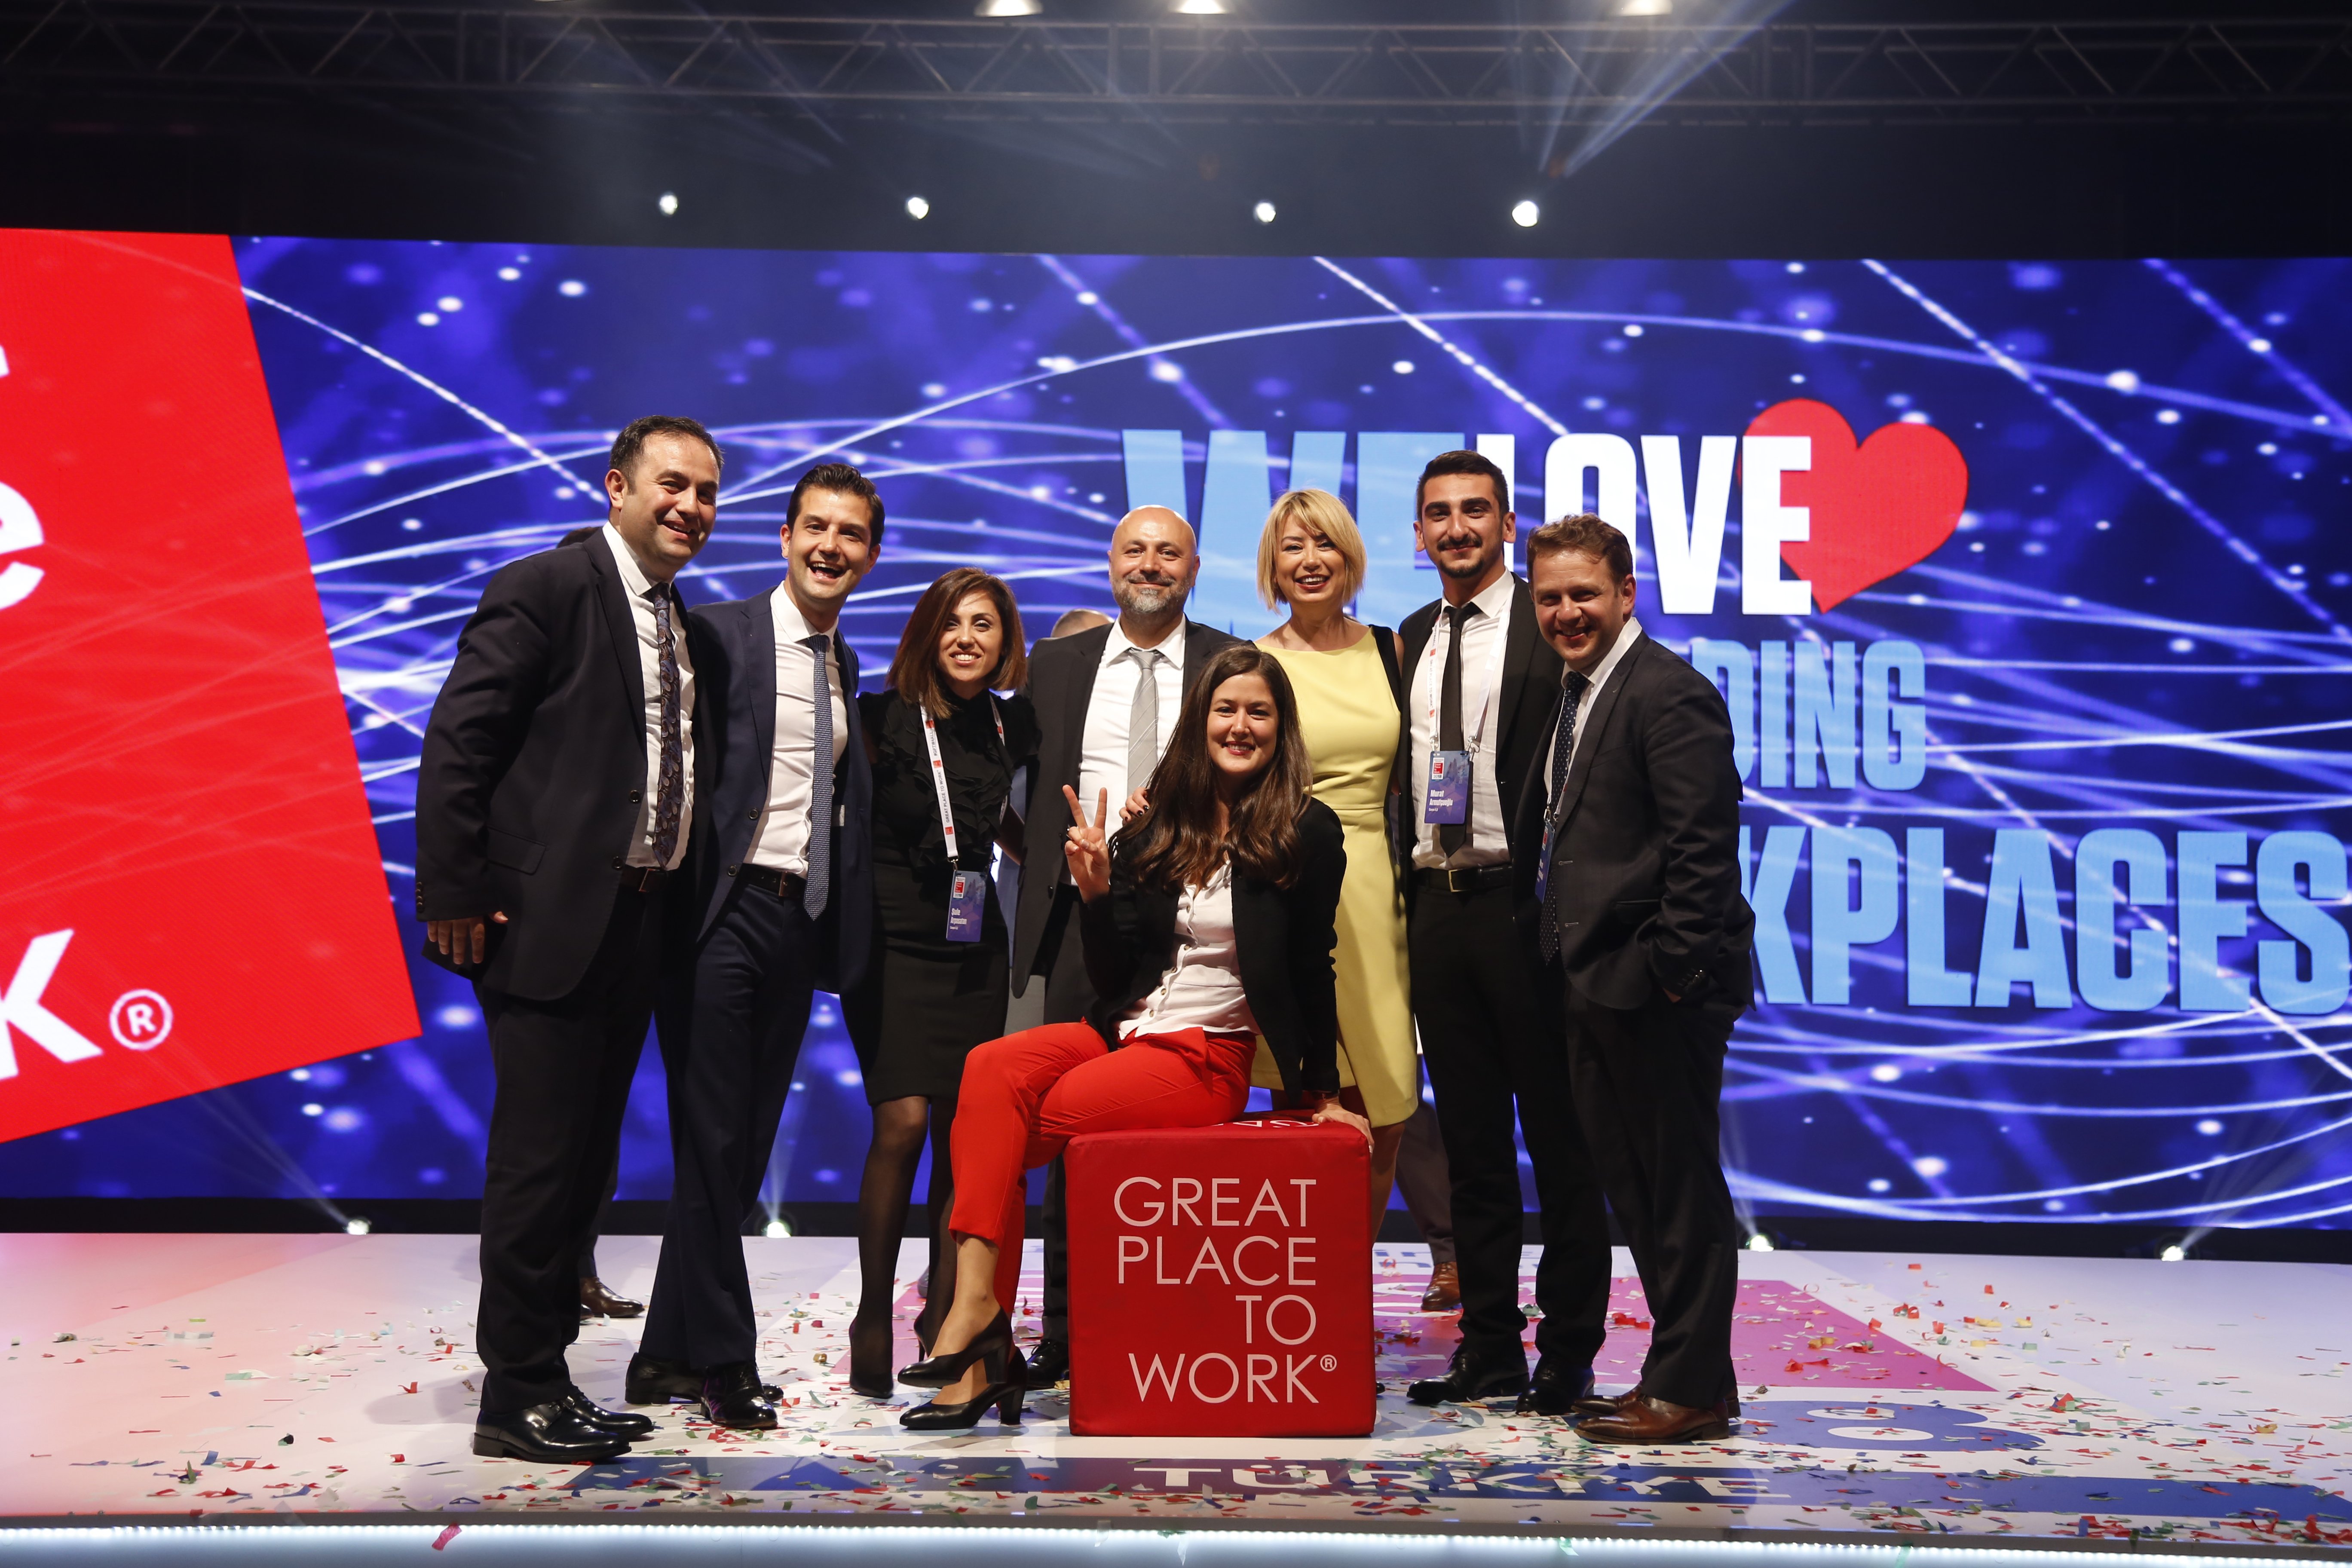 FIRST PLACE in Turkey’s 2018 “Great Place to Work” assessment, Delivering Happiness